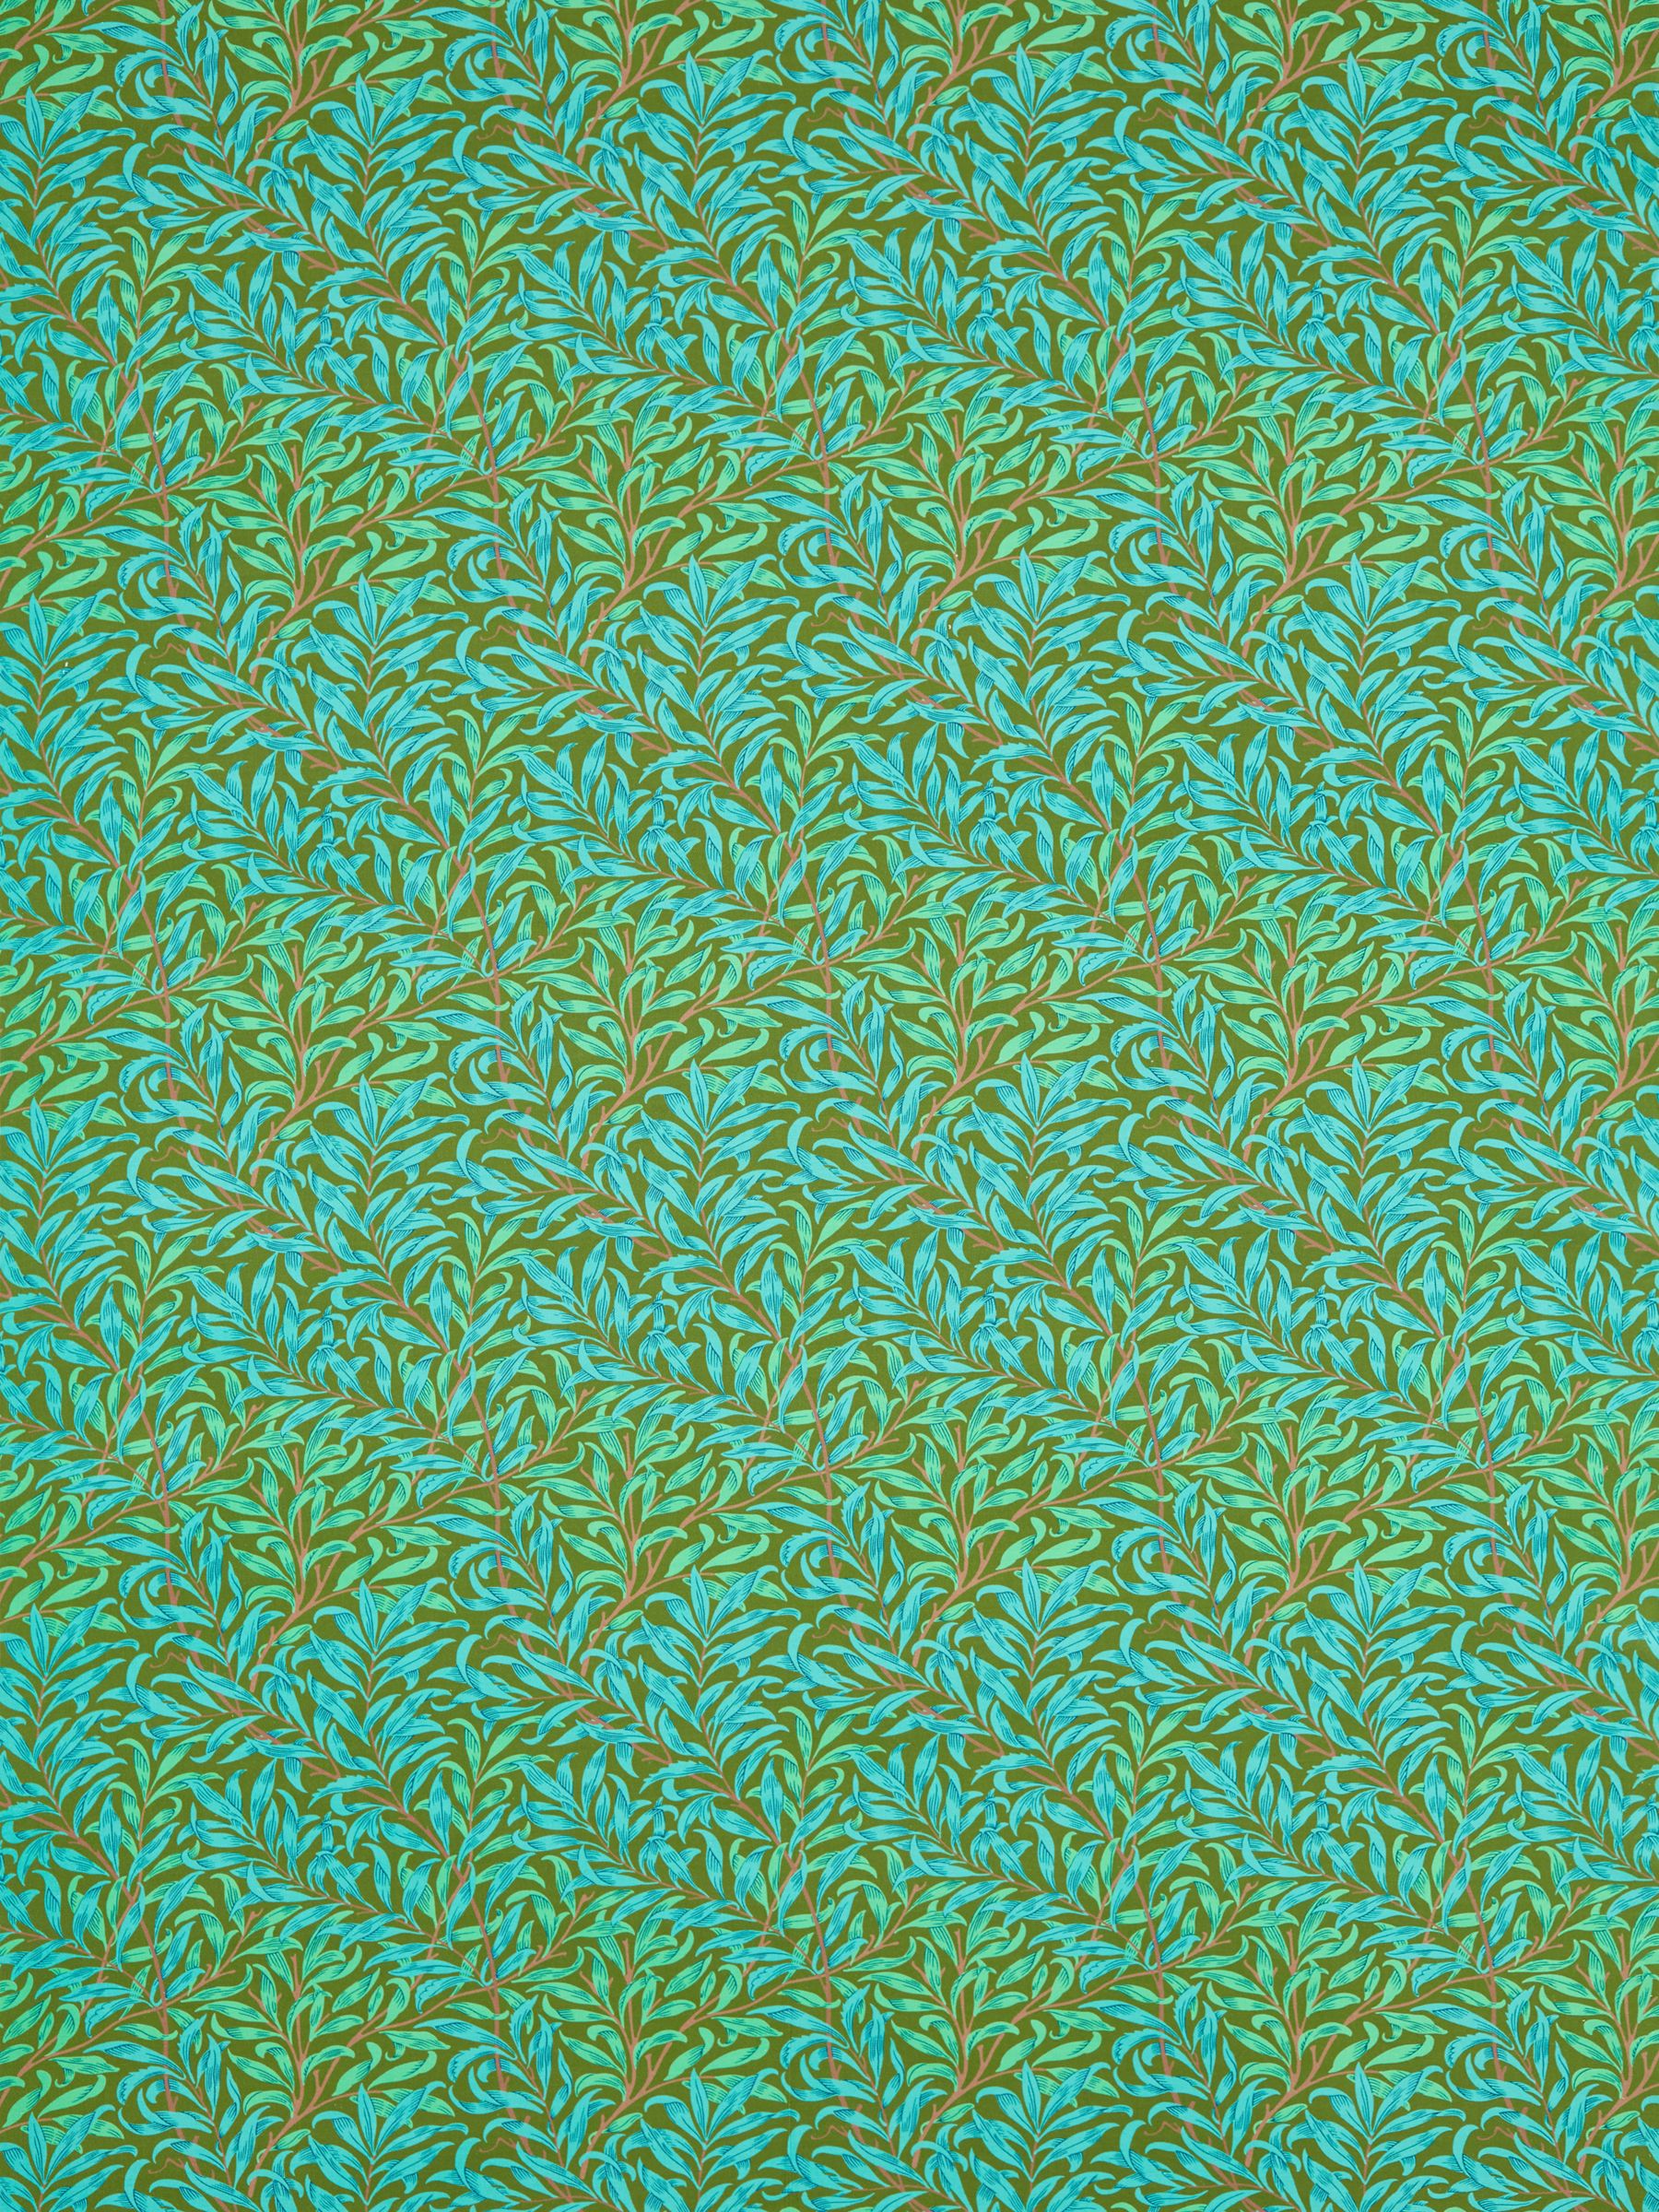 Morris & Co. Willow Boughs Furnishing Fabric, Olive/Turquoise